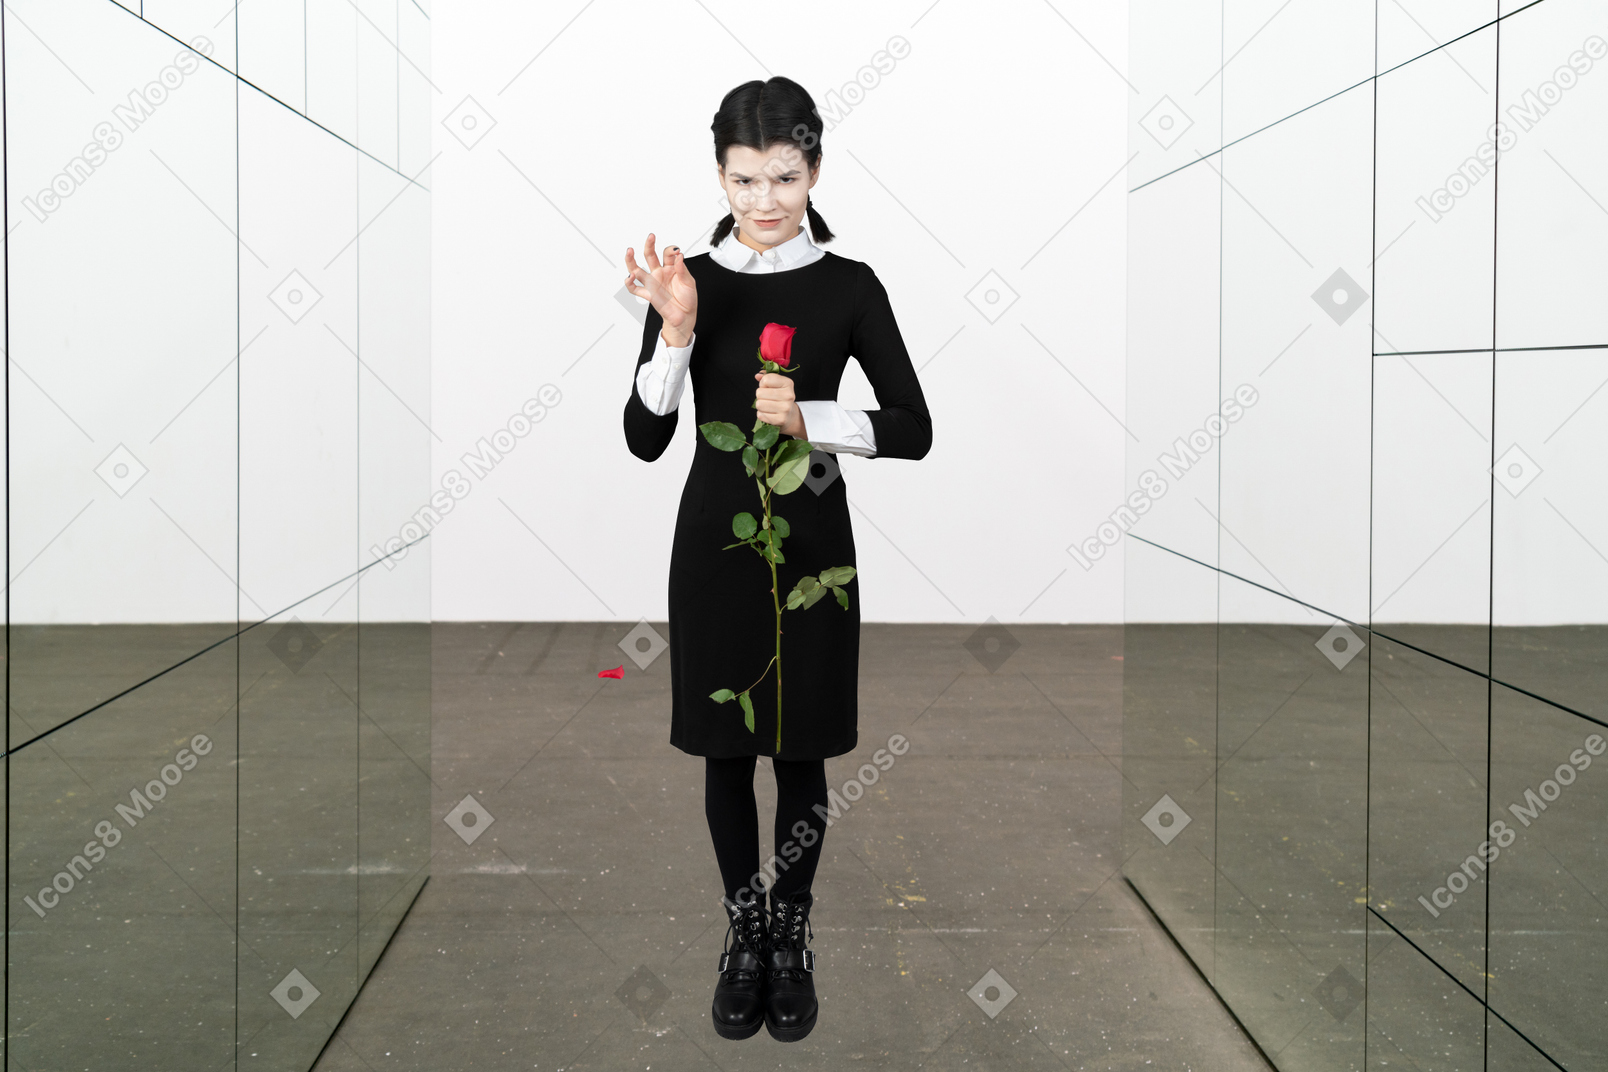 A woman in a black dress holding a rose